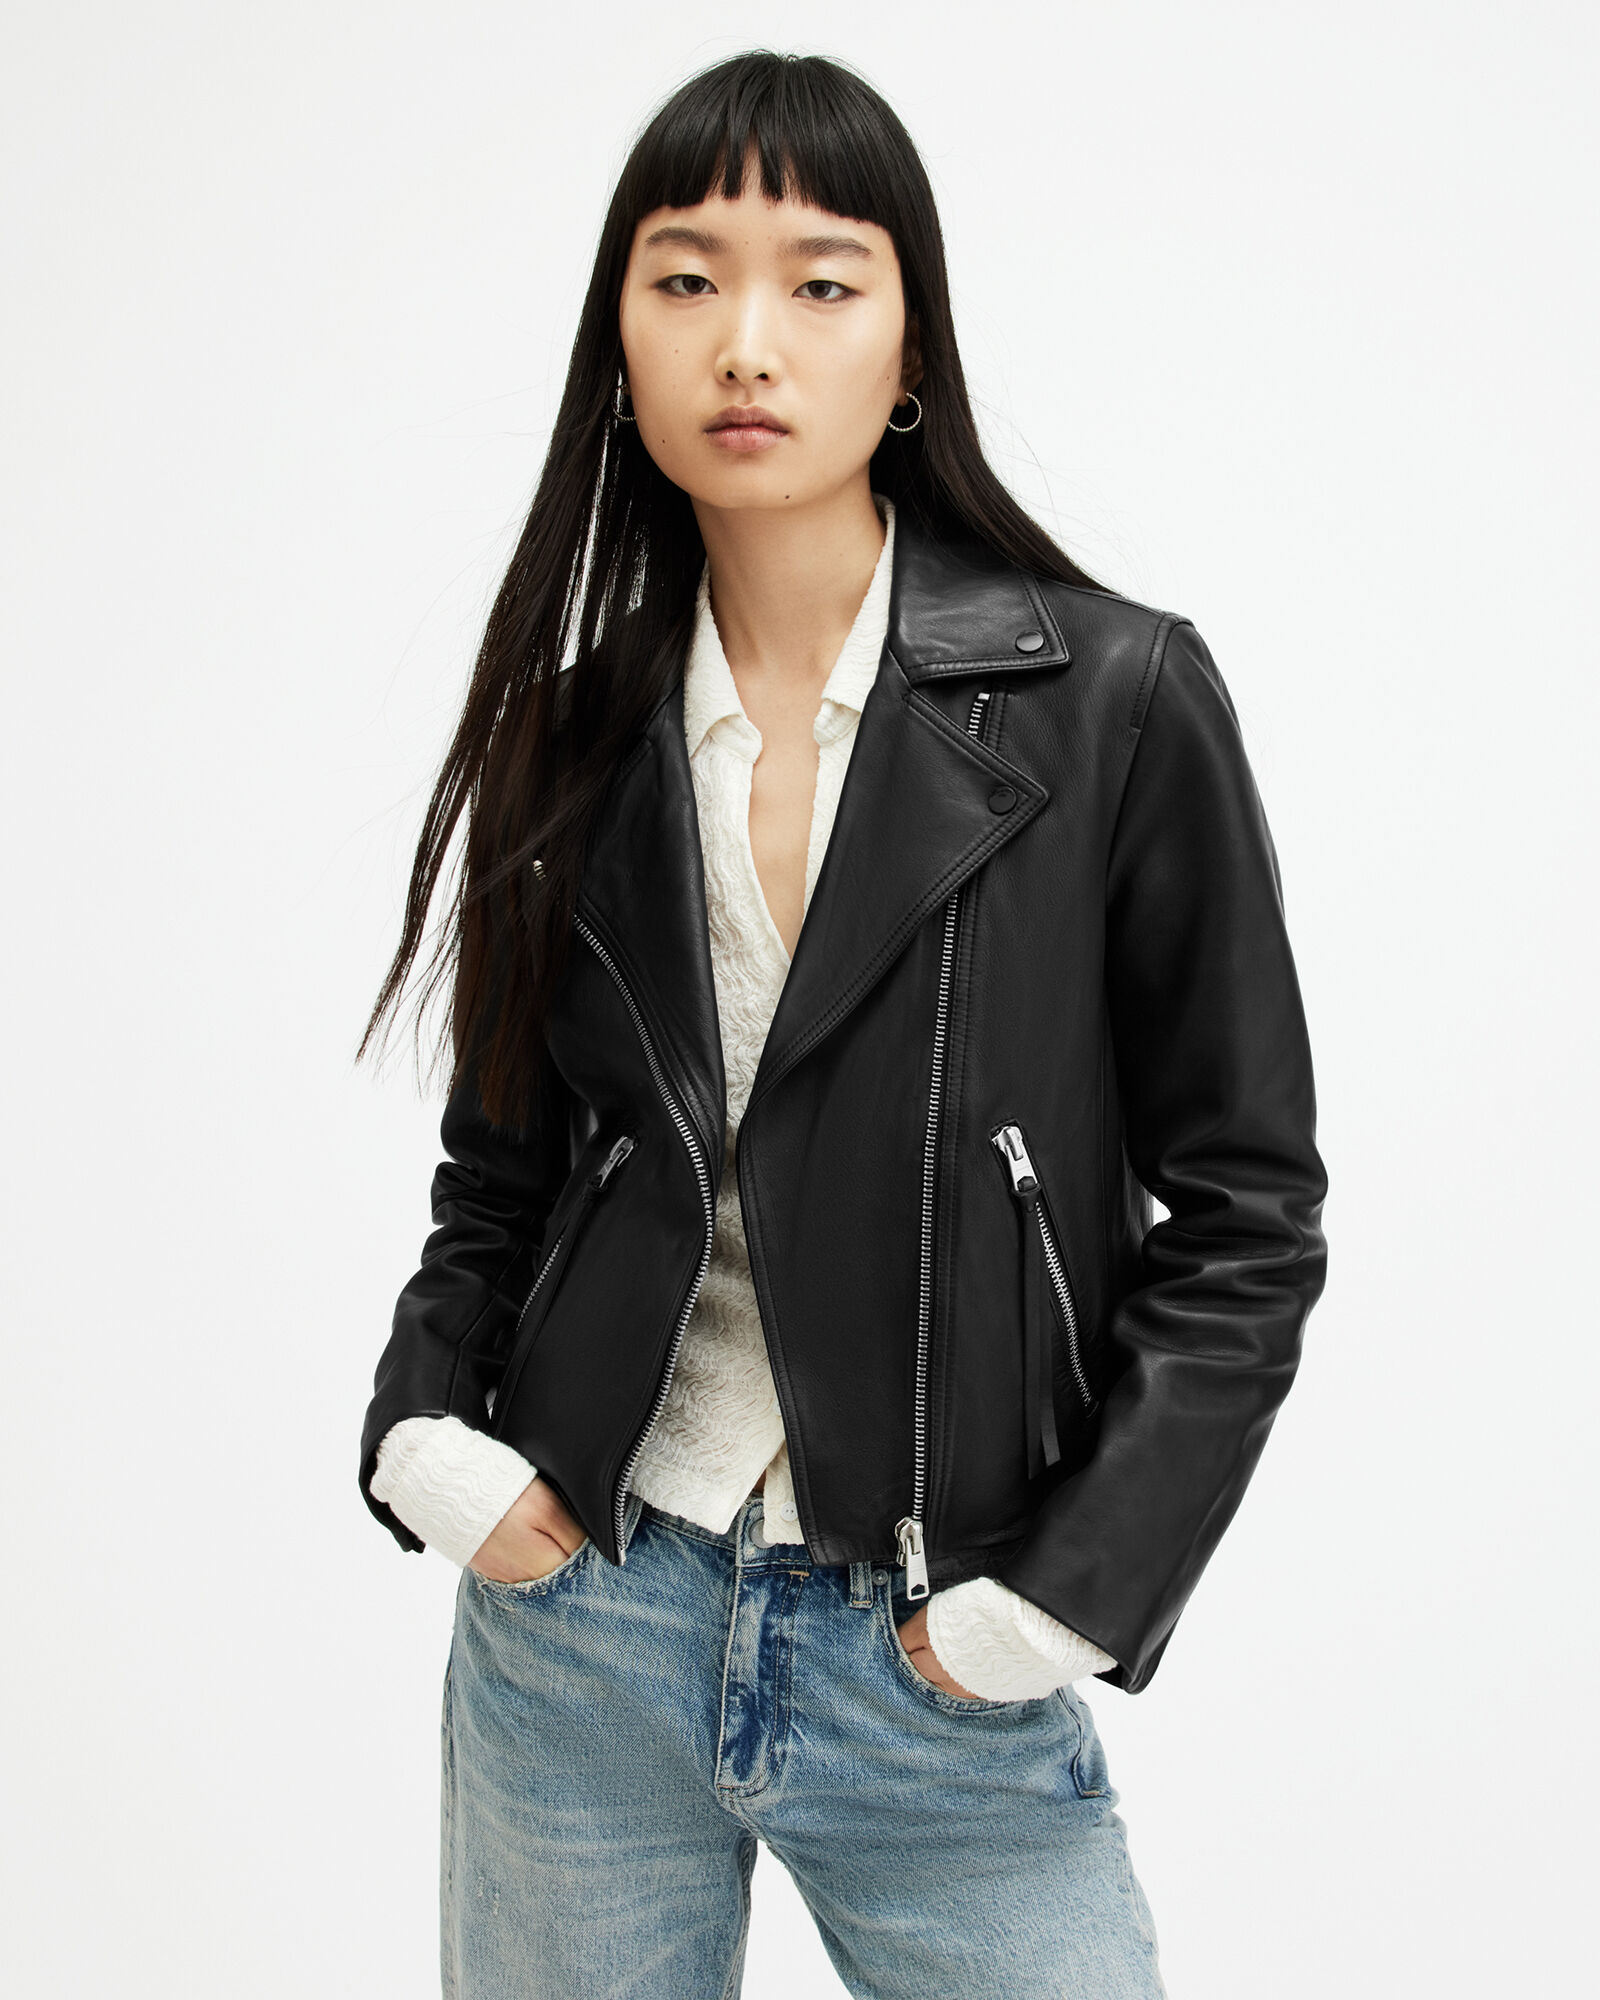 How To Use Leather Jackets to Boost Your Business Casuals - Fashion Tips  and Style Guides by Angel Jackets